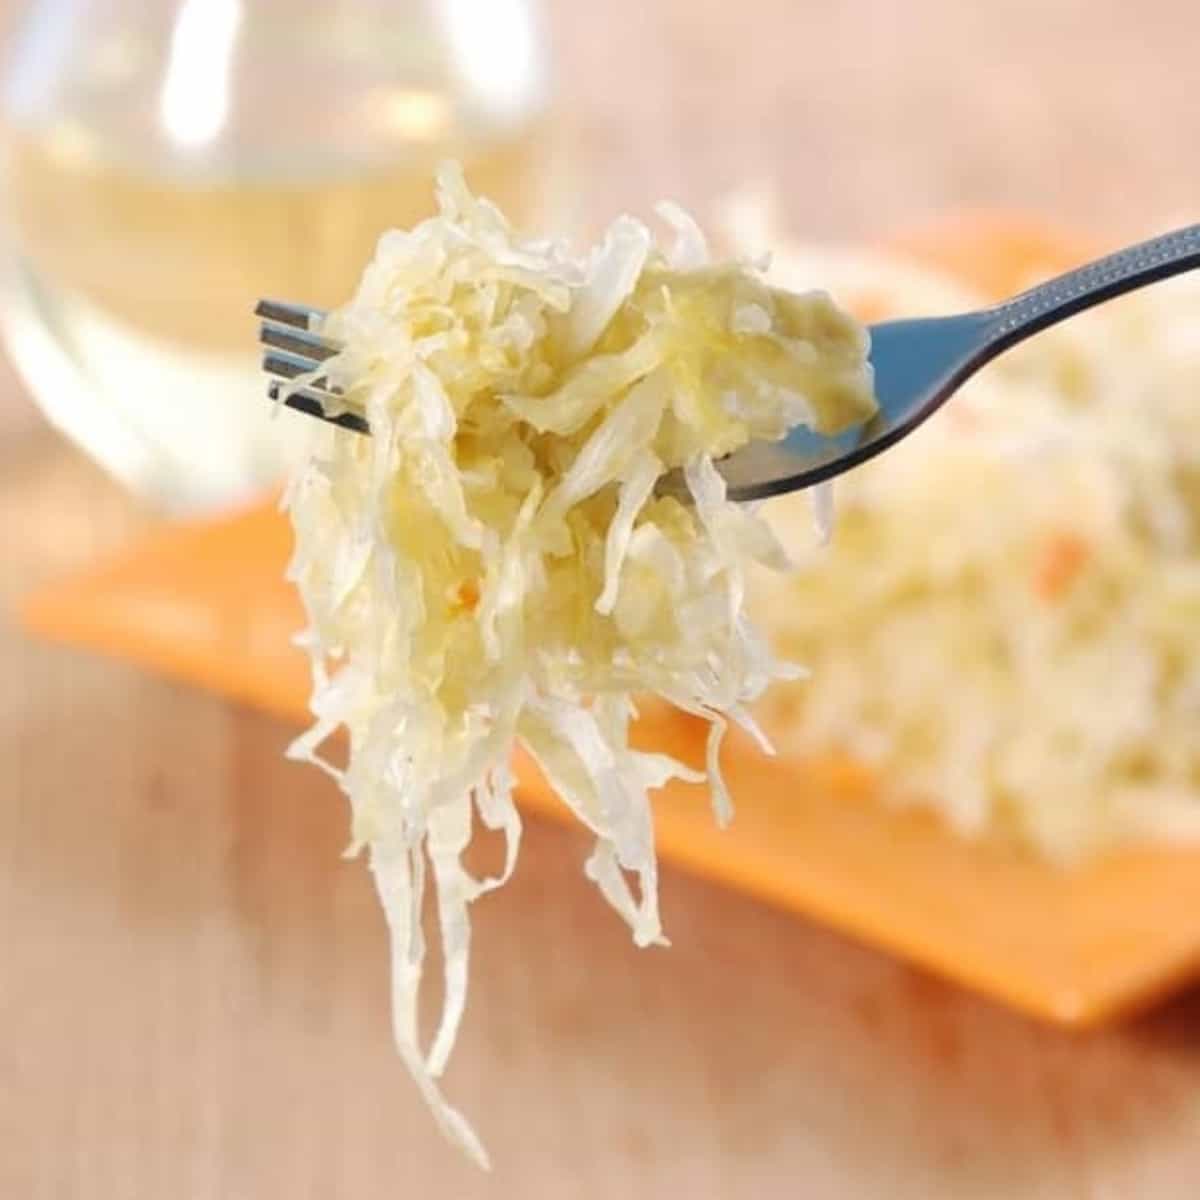 Close up side view of a glass jar full to the brim with ready to eat sauerkraut.